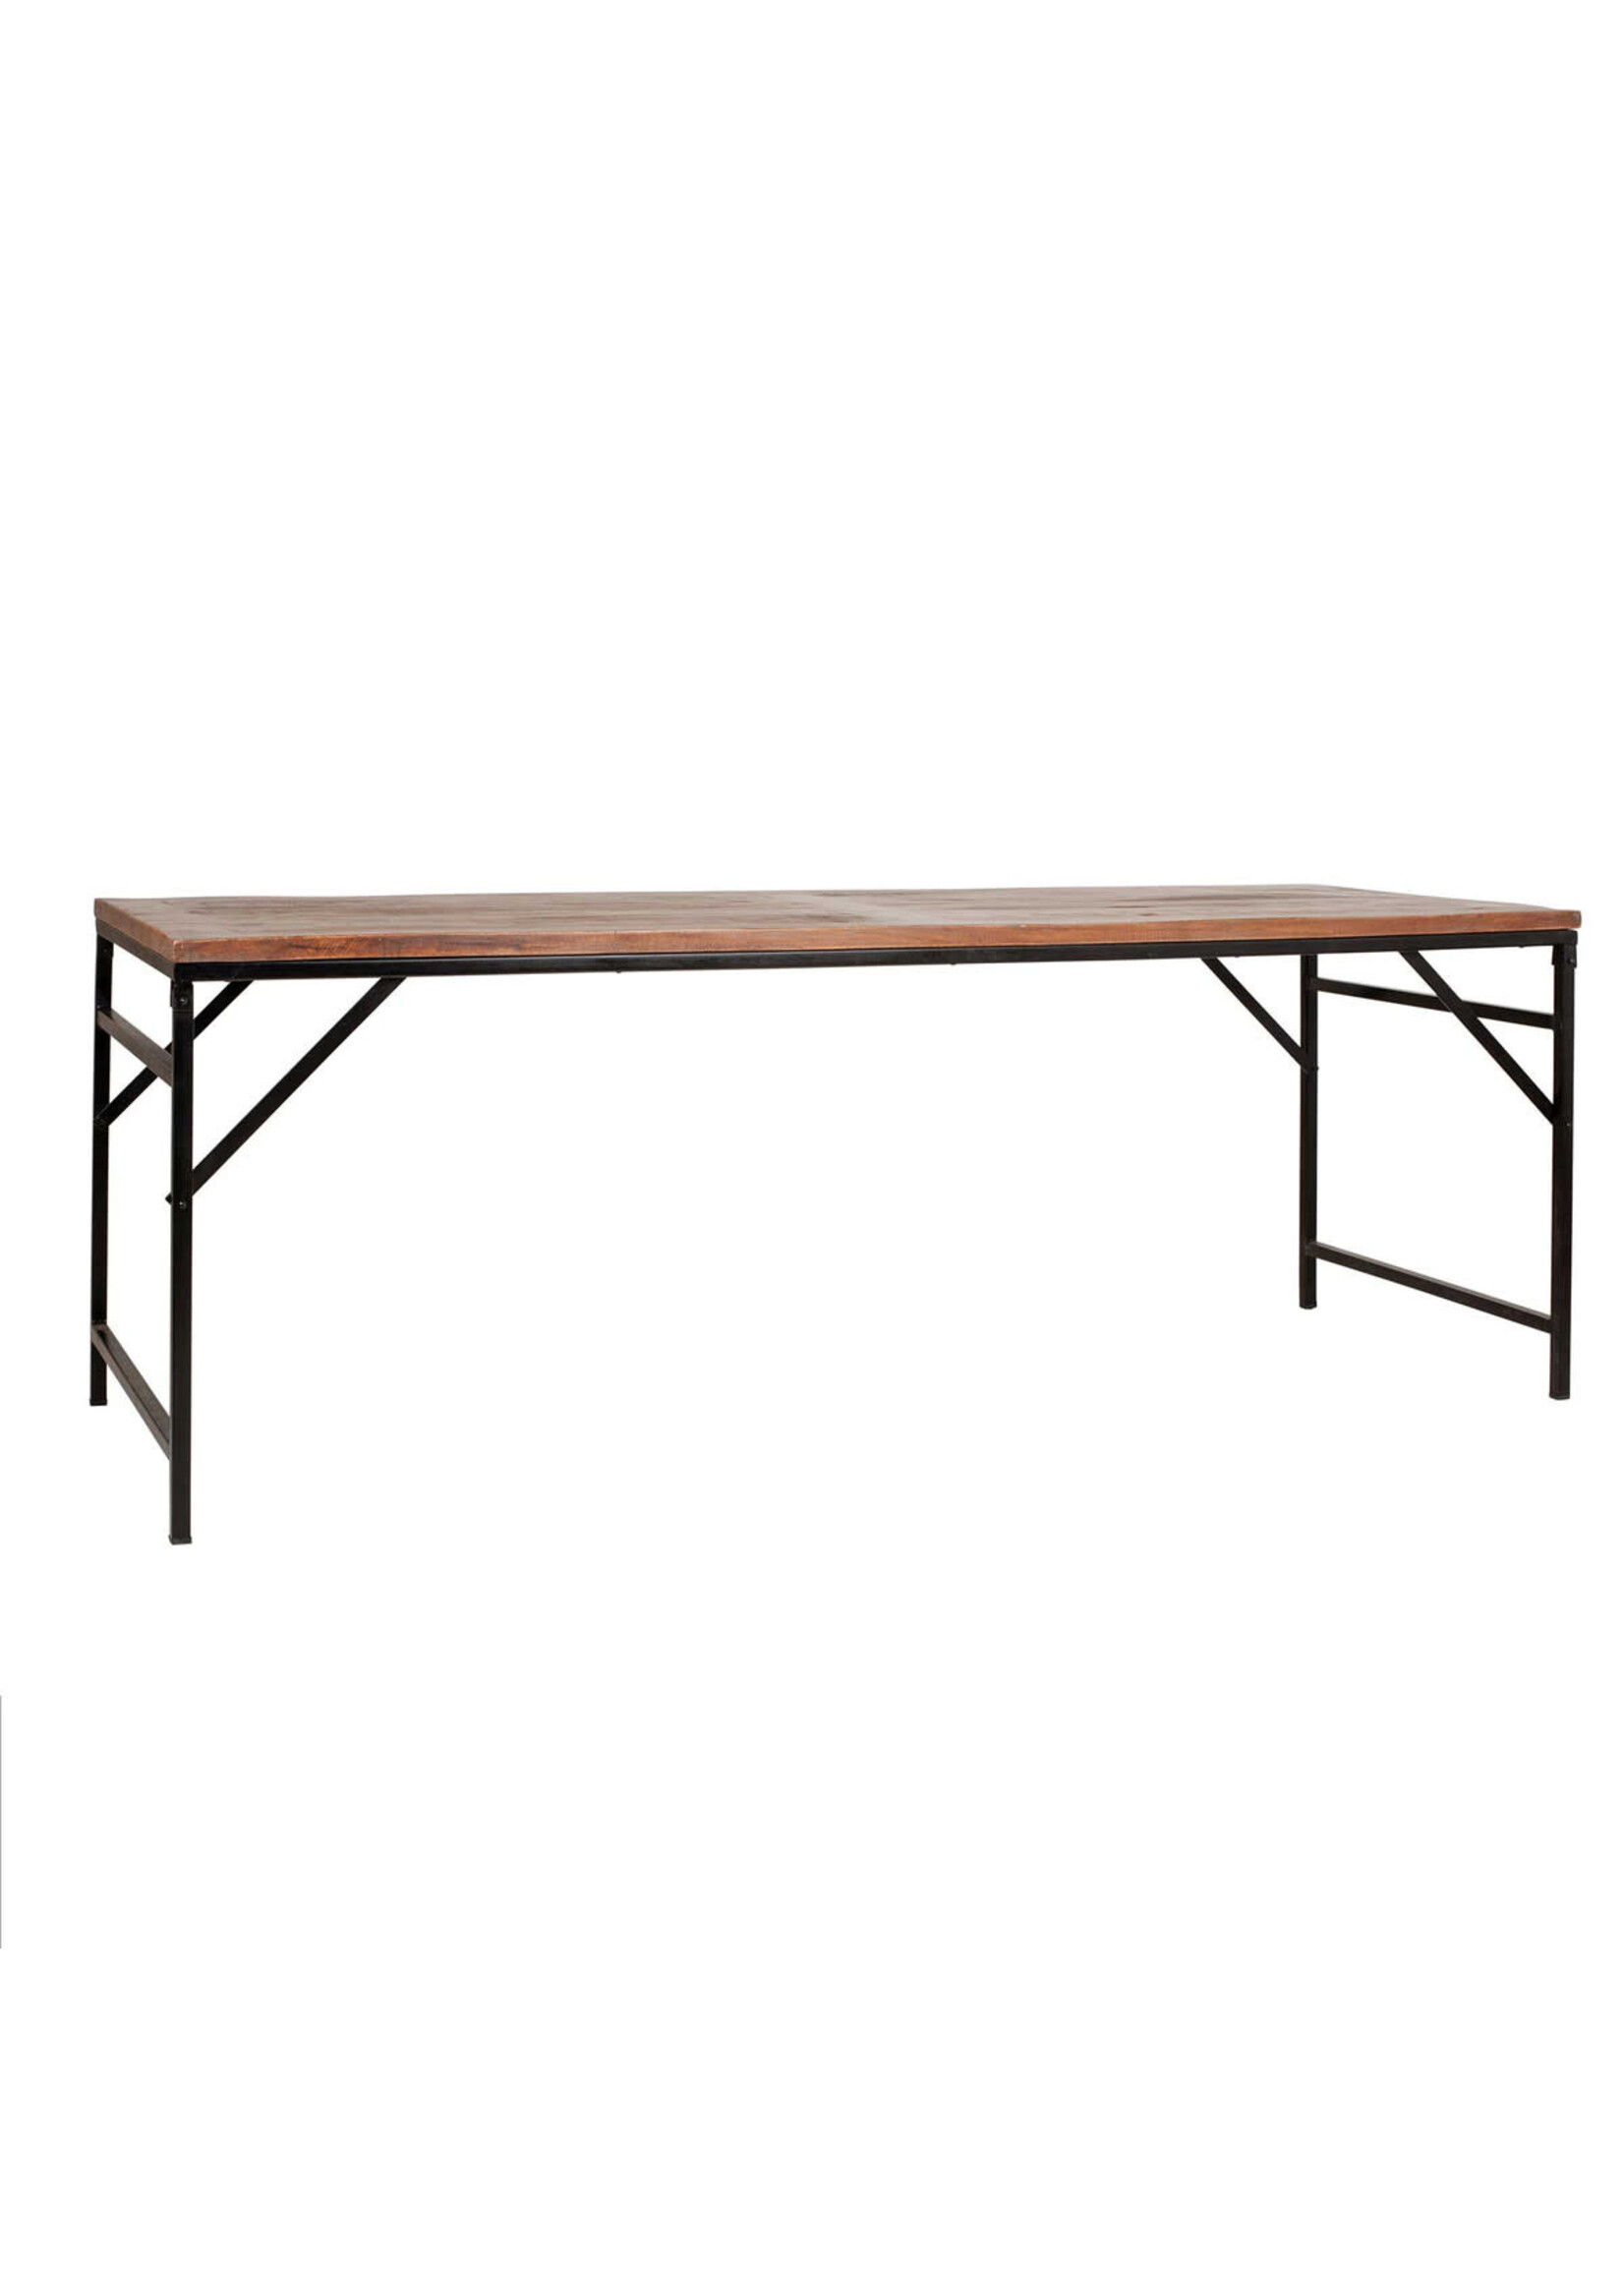 Jeffan Barley 85" Dining Table, Wood and Iron